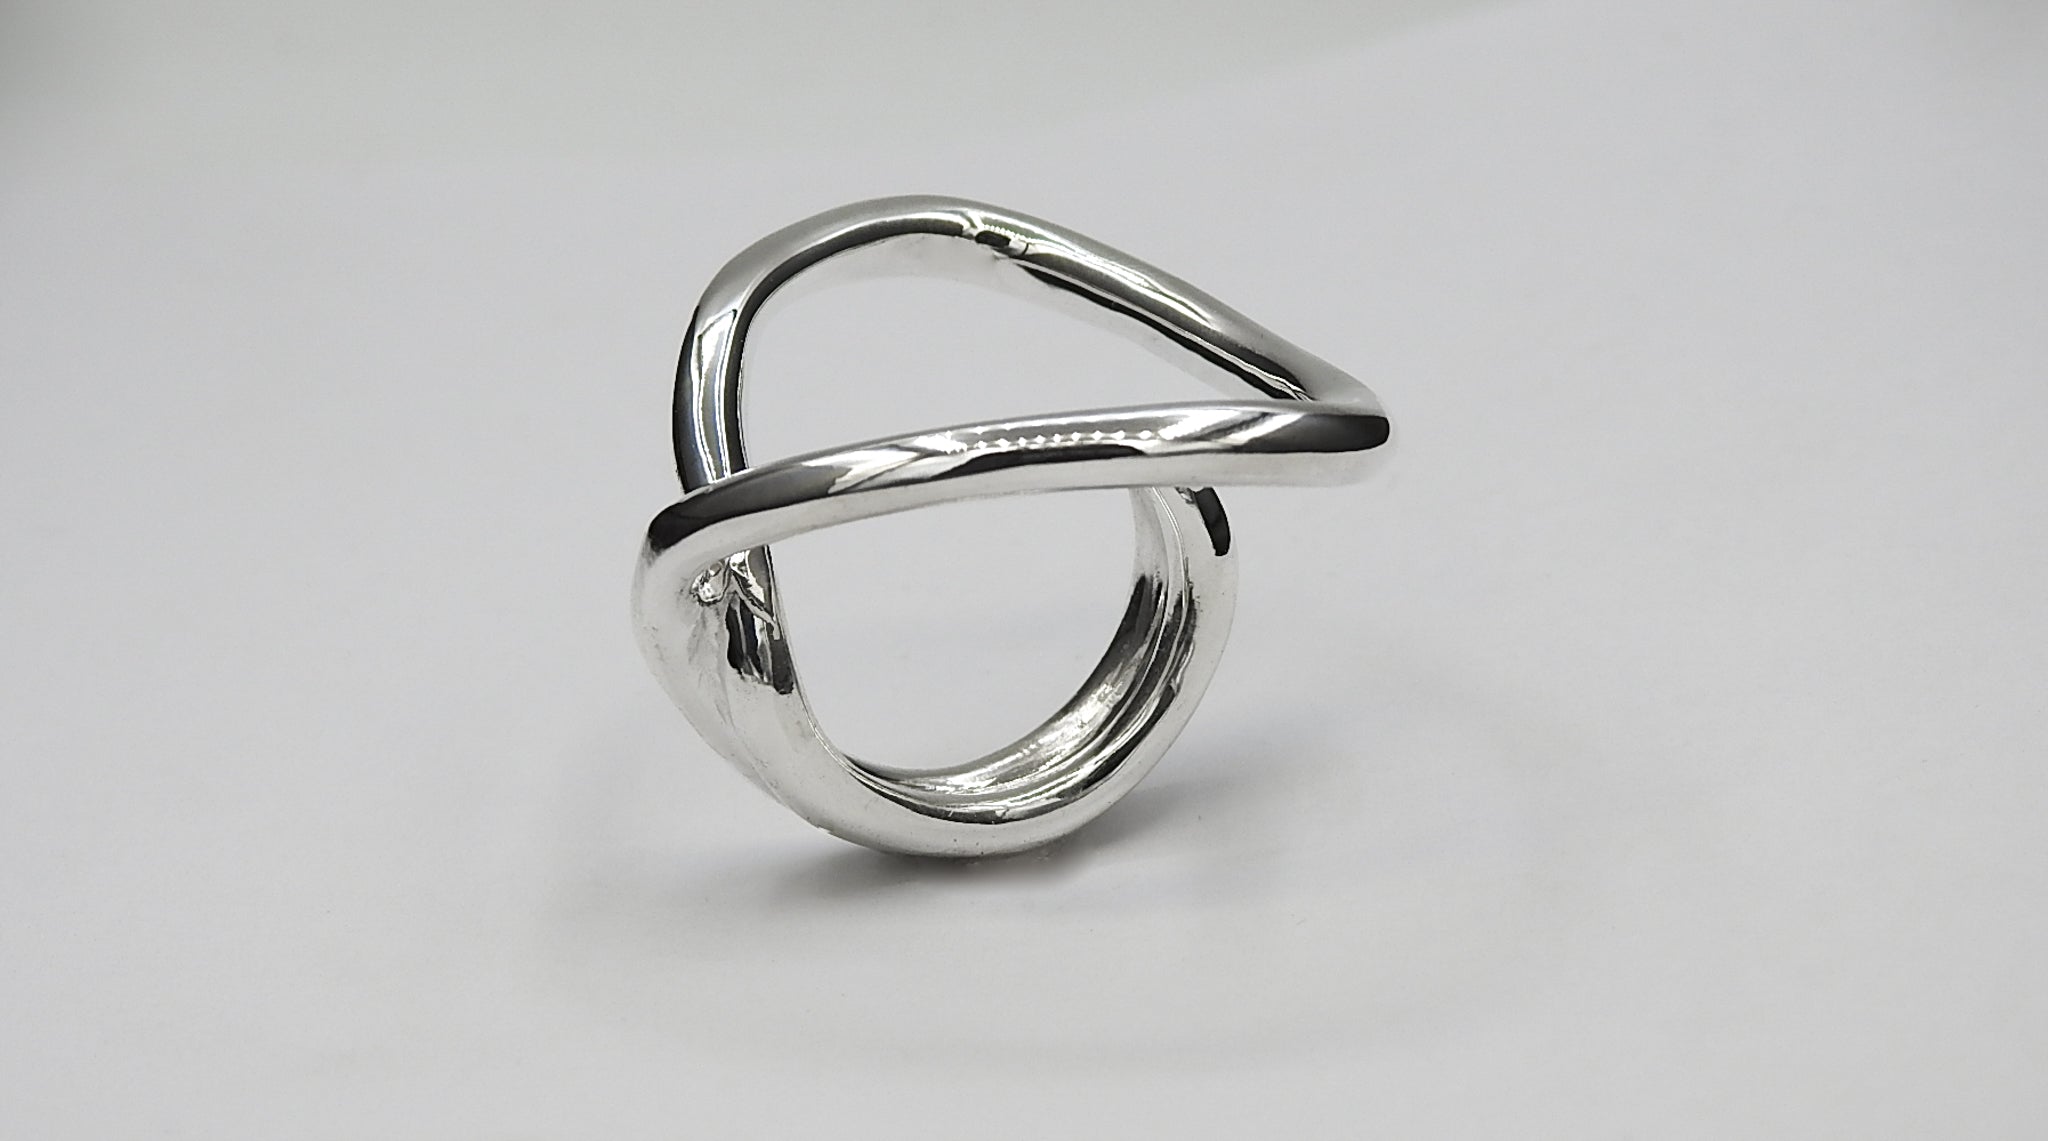 Large Triangle Ring